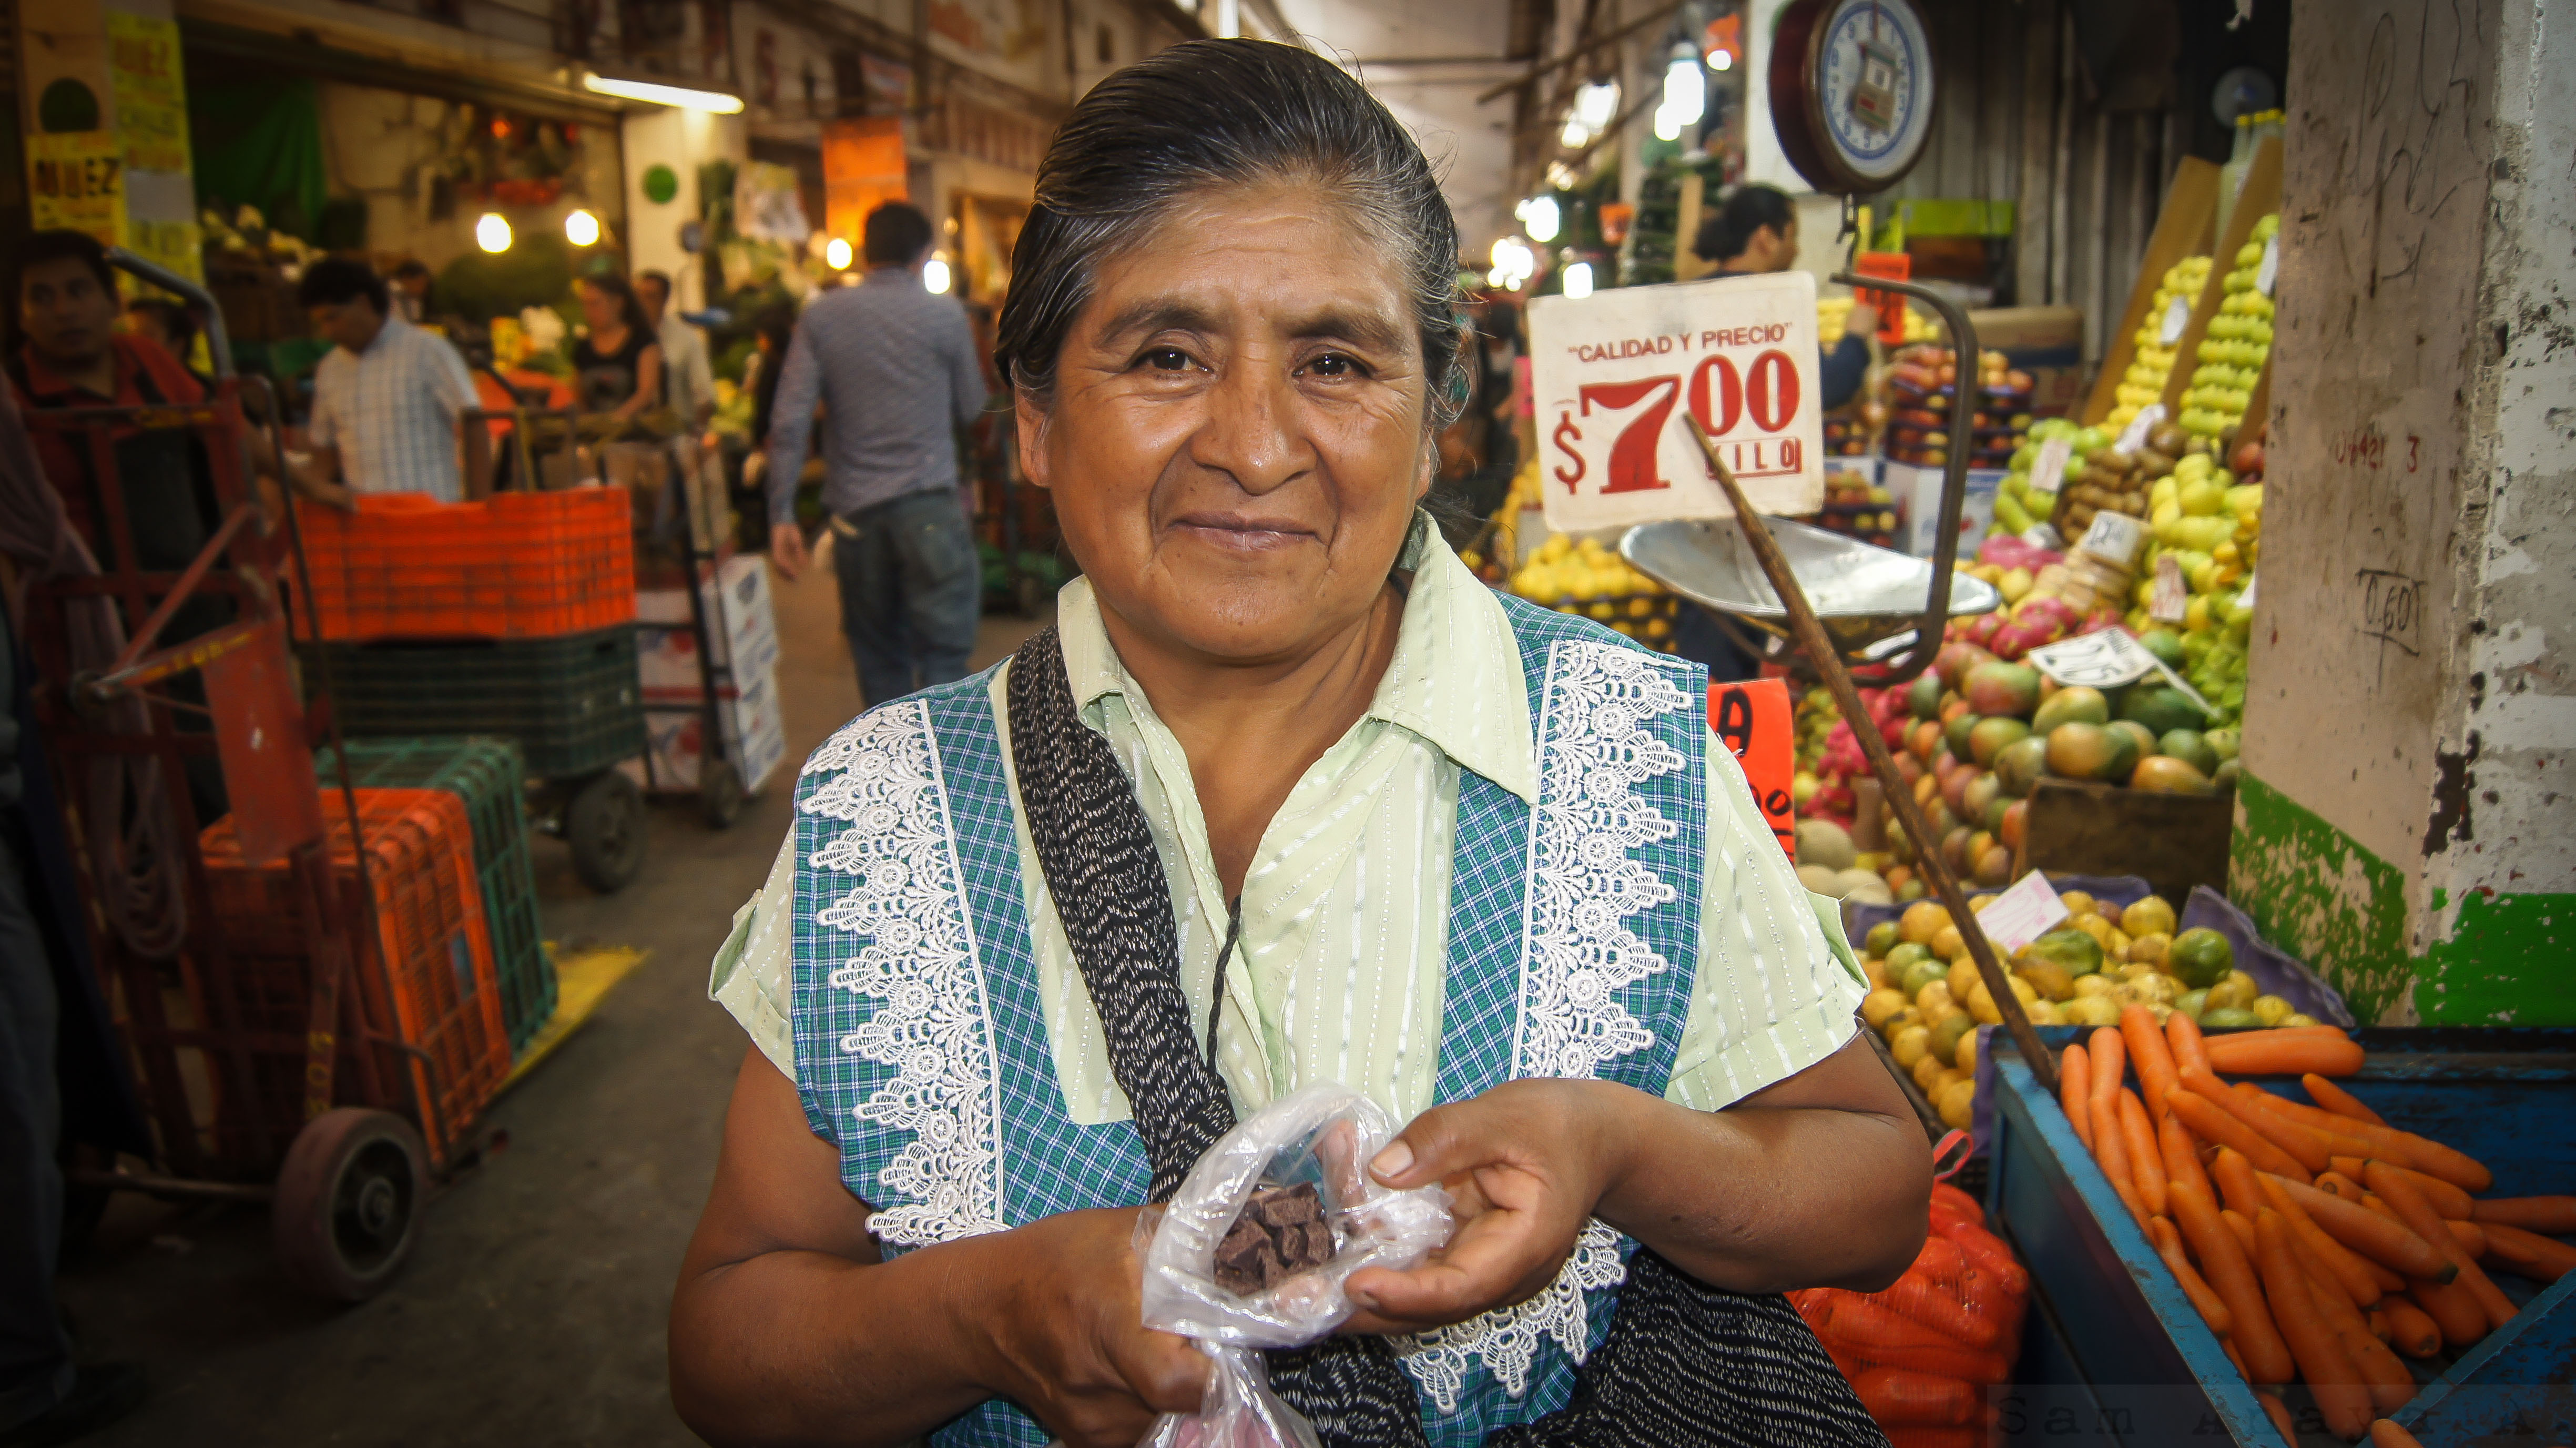 A woman selling chocolate at Central de Abasto, the world's largest wholesale market where Mexico's cultural heritage is also on display. (image © Sam Anaya A.)